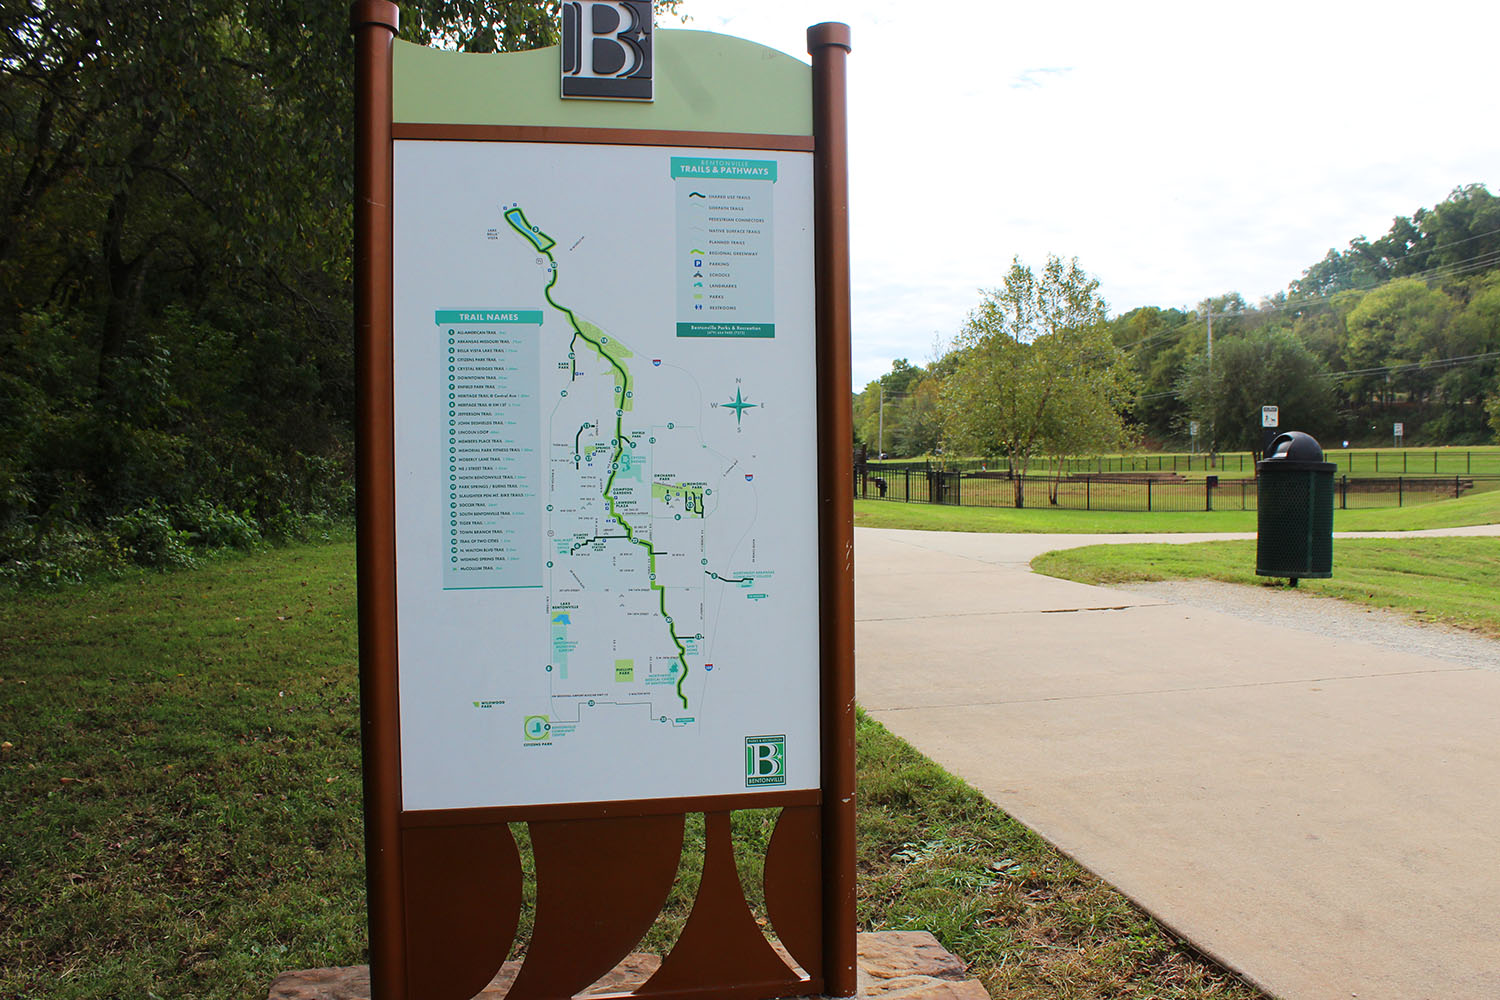 A nature trail in Bentonville, a great reason to visit Bentonville